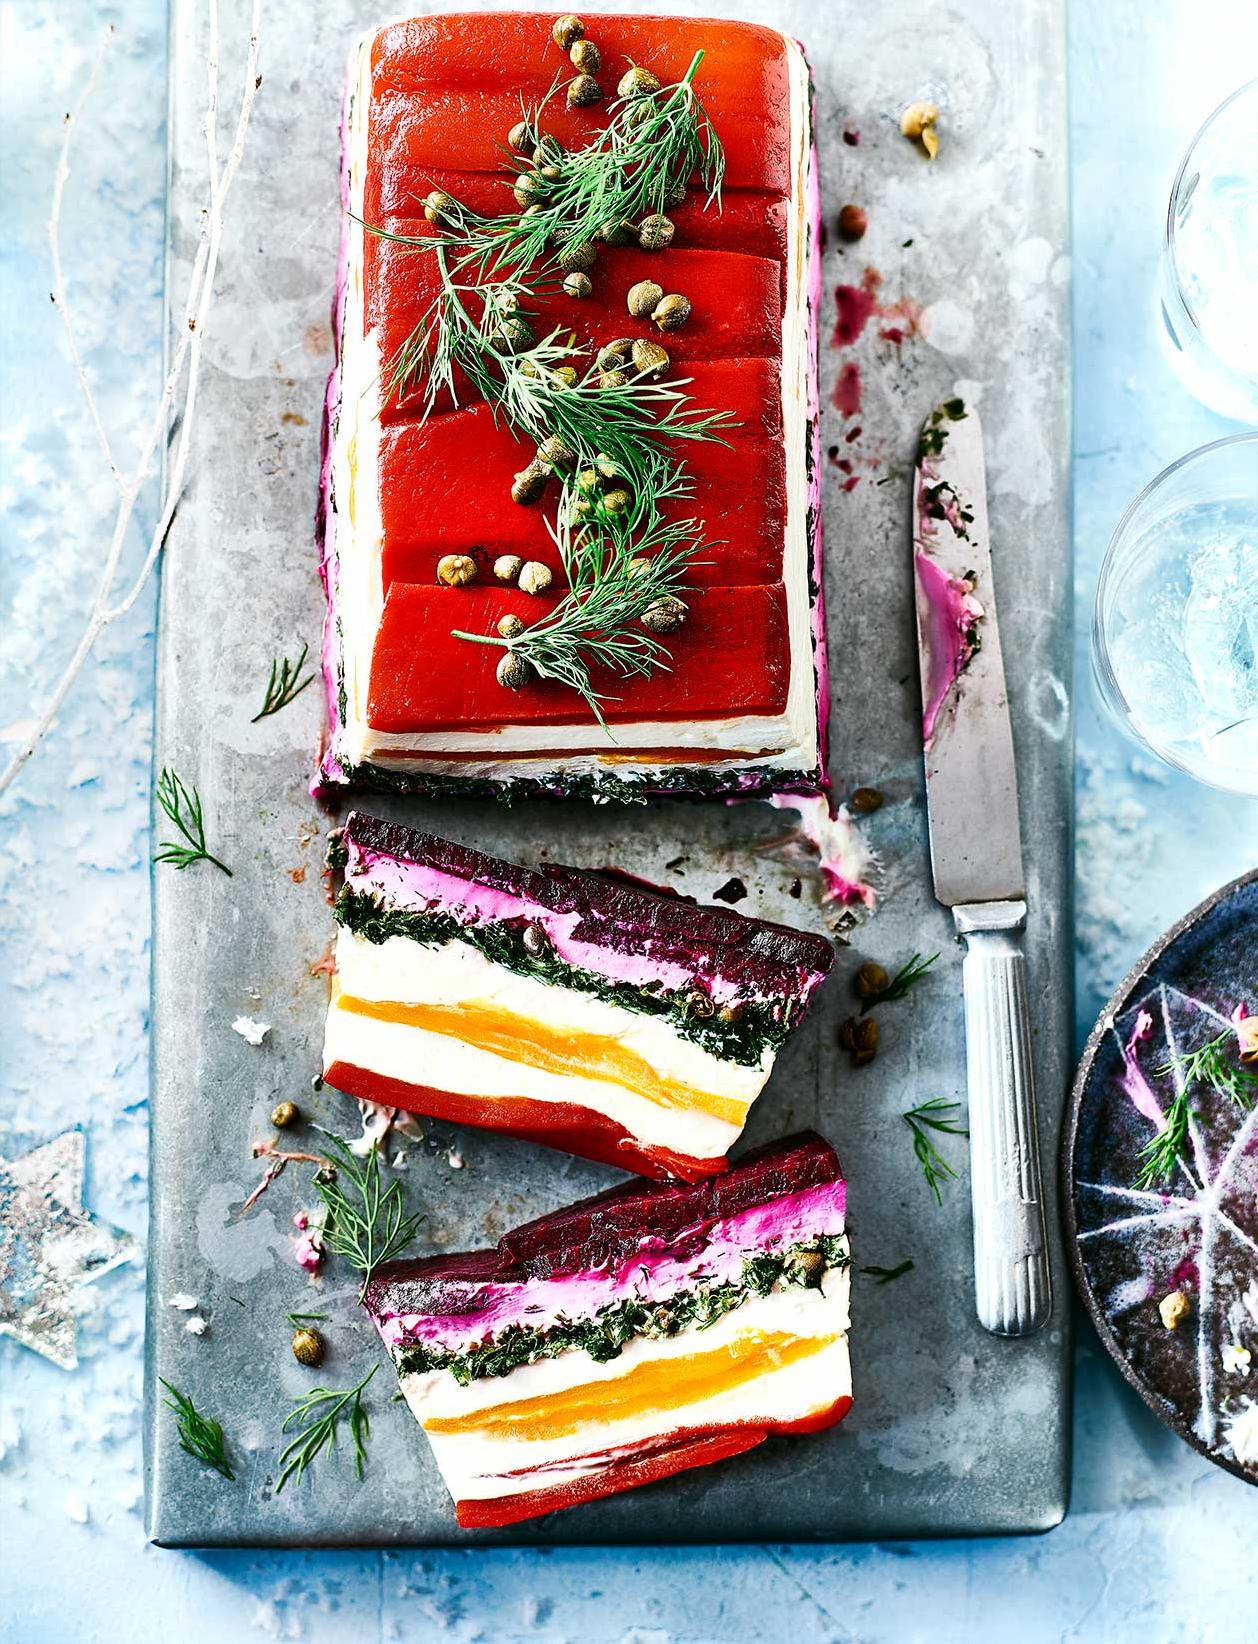  Layers of delicious veggies, nuts and tofu come together in this beautiful terrine.